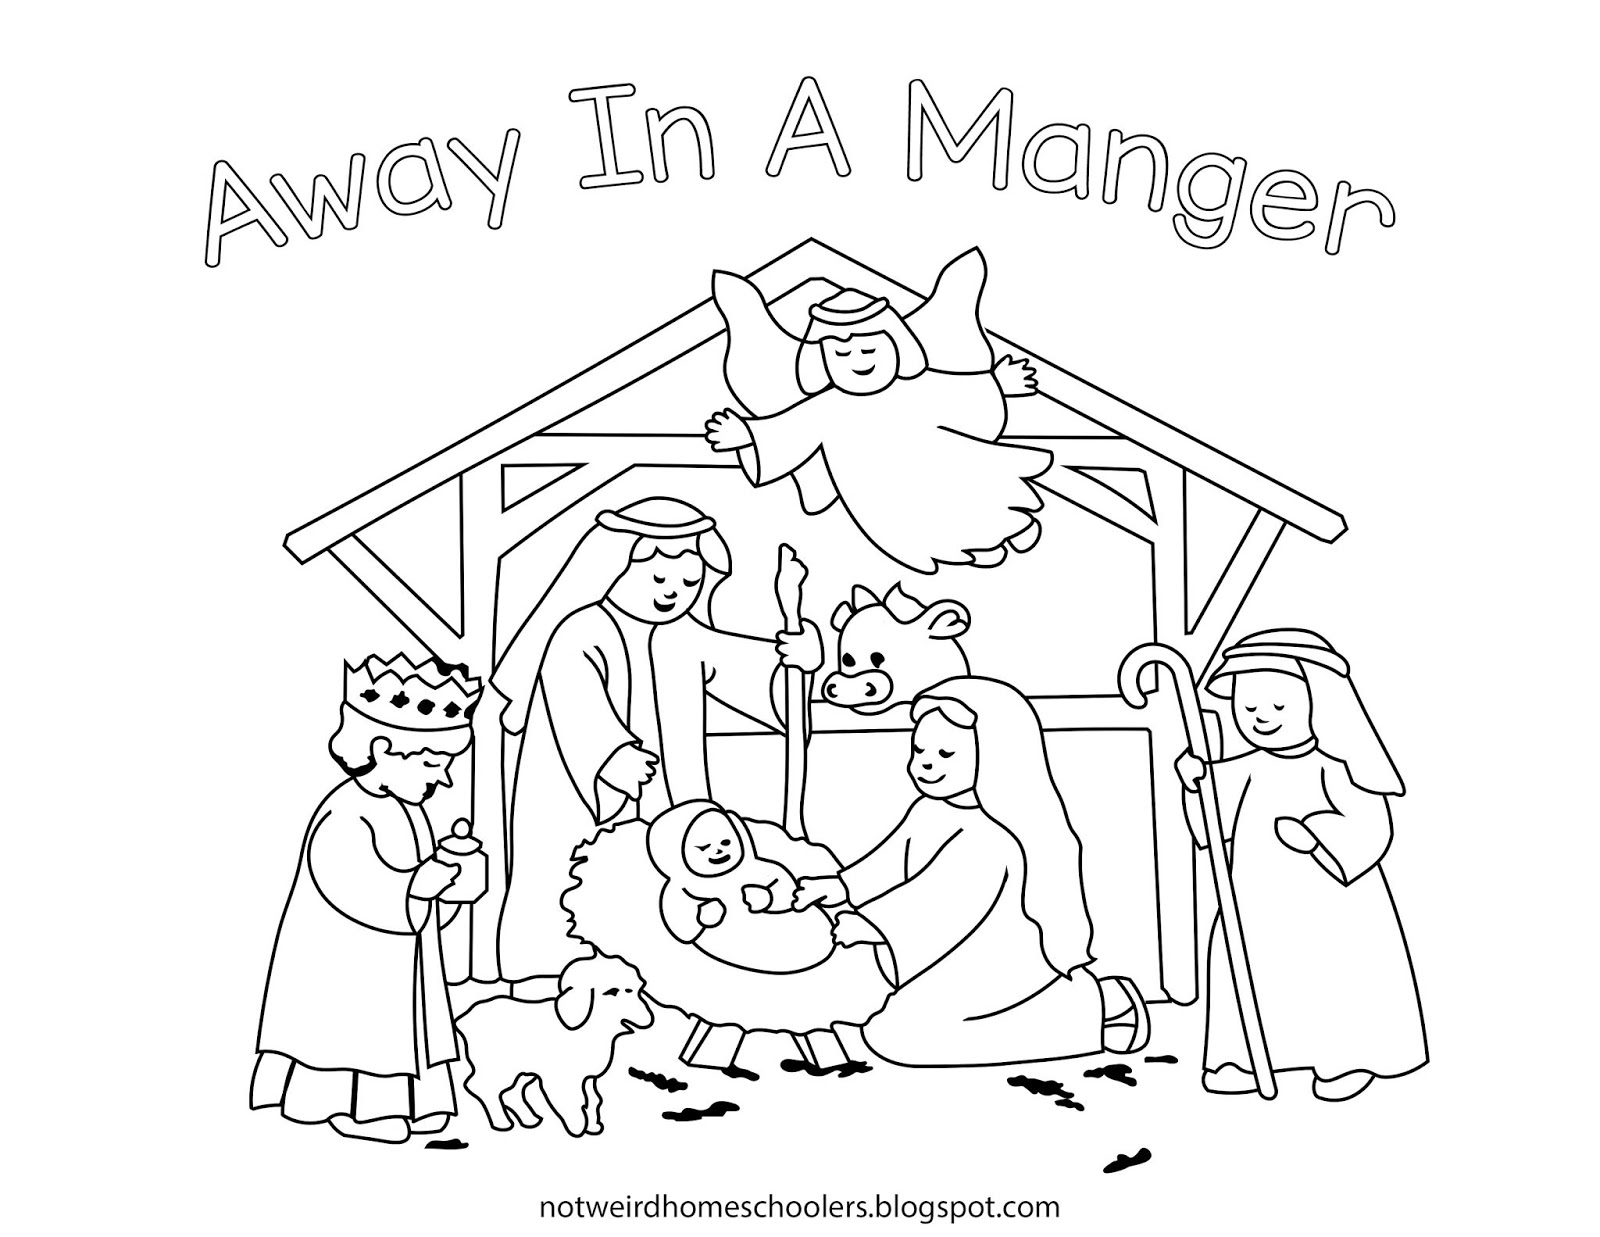 FREE HOMESCHOOLING RESOURCE!!! Nativity Scene Coloring Page